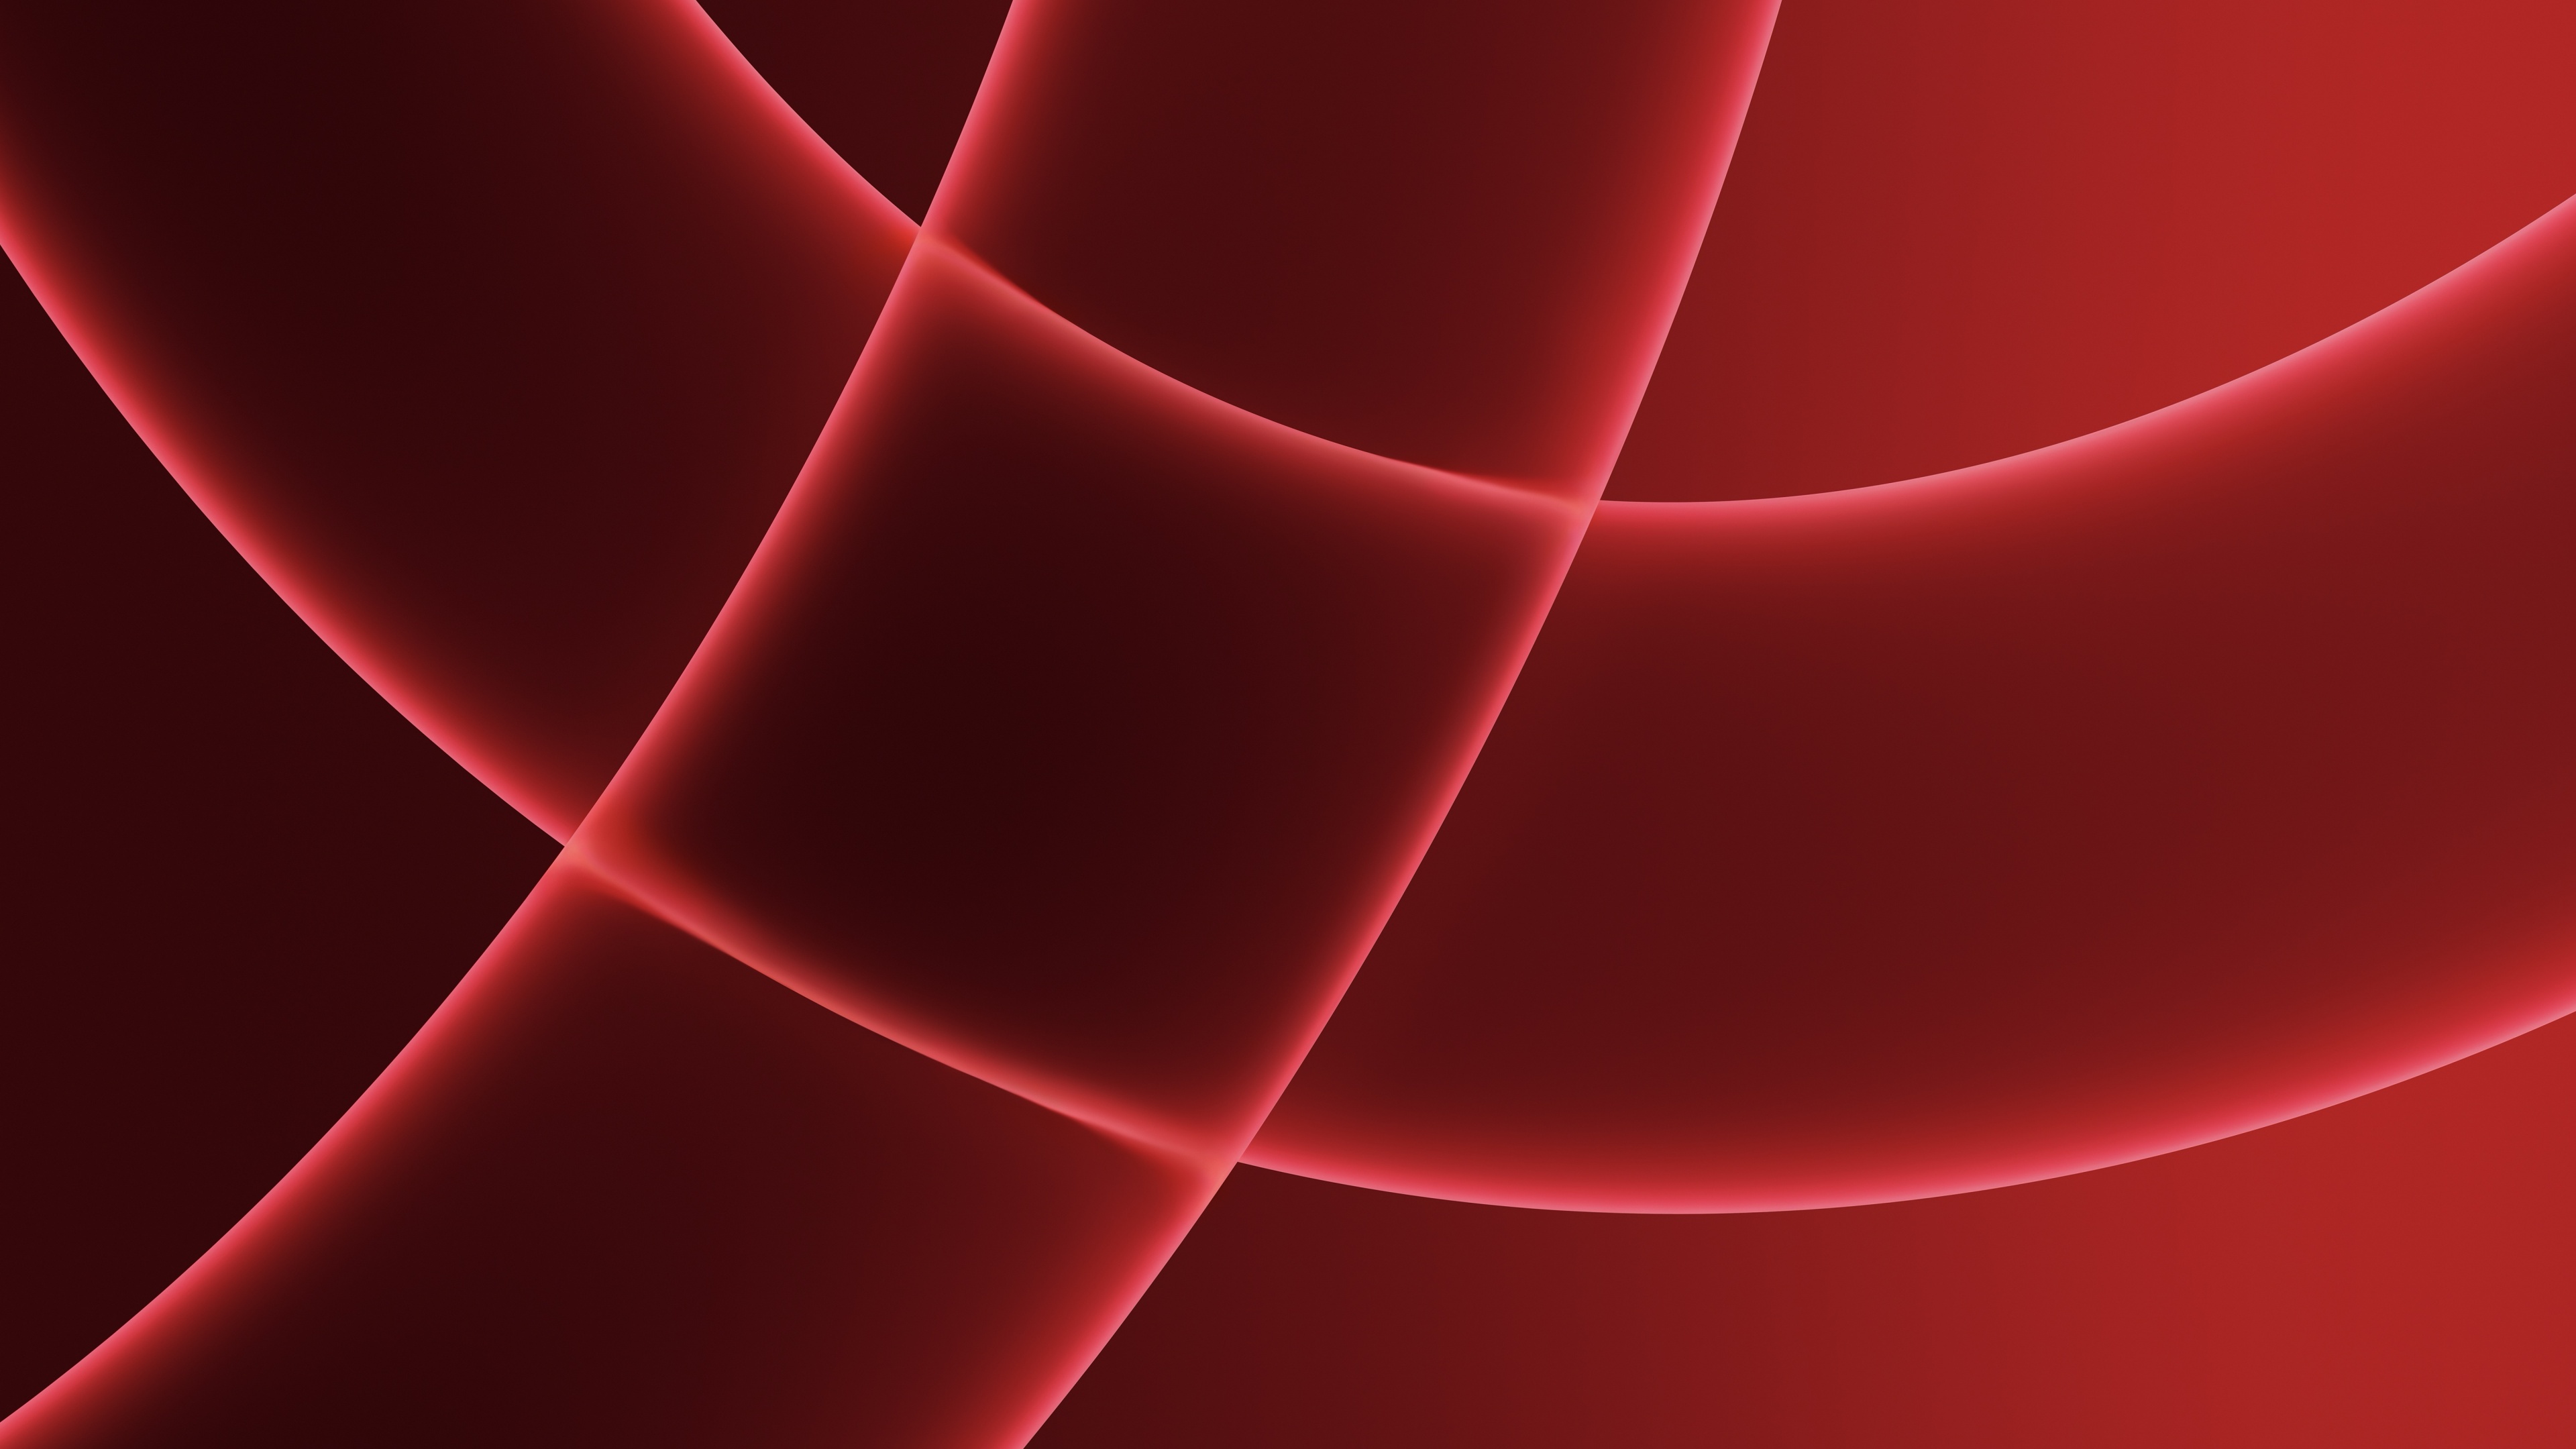 Imac 21 Wallpaper 4k Apple Event 21 Stock Red Background 5k Abstract 5266